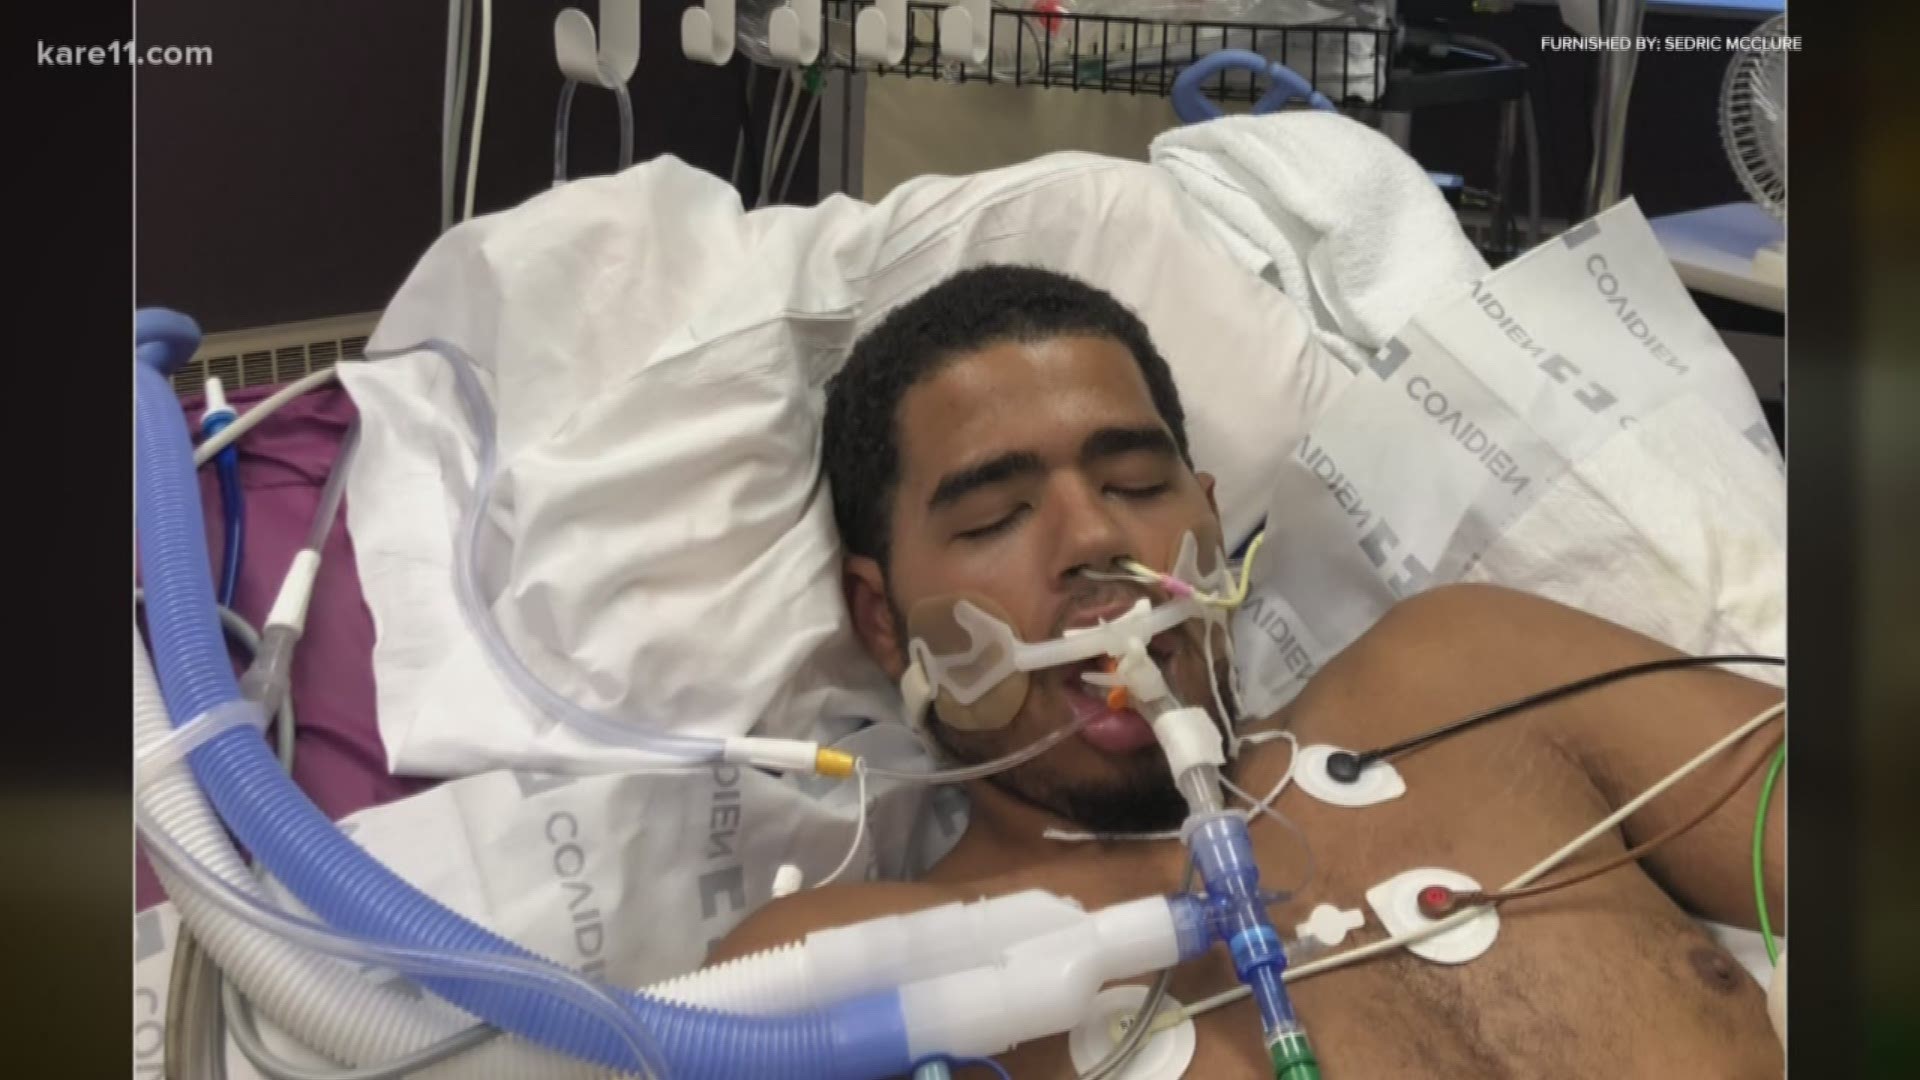 The parents of a 21-year-old man from Brooklyn Park say he's among a growing number people suffering from severe lung injury linked to vaping.